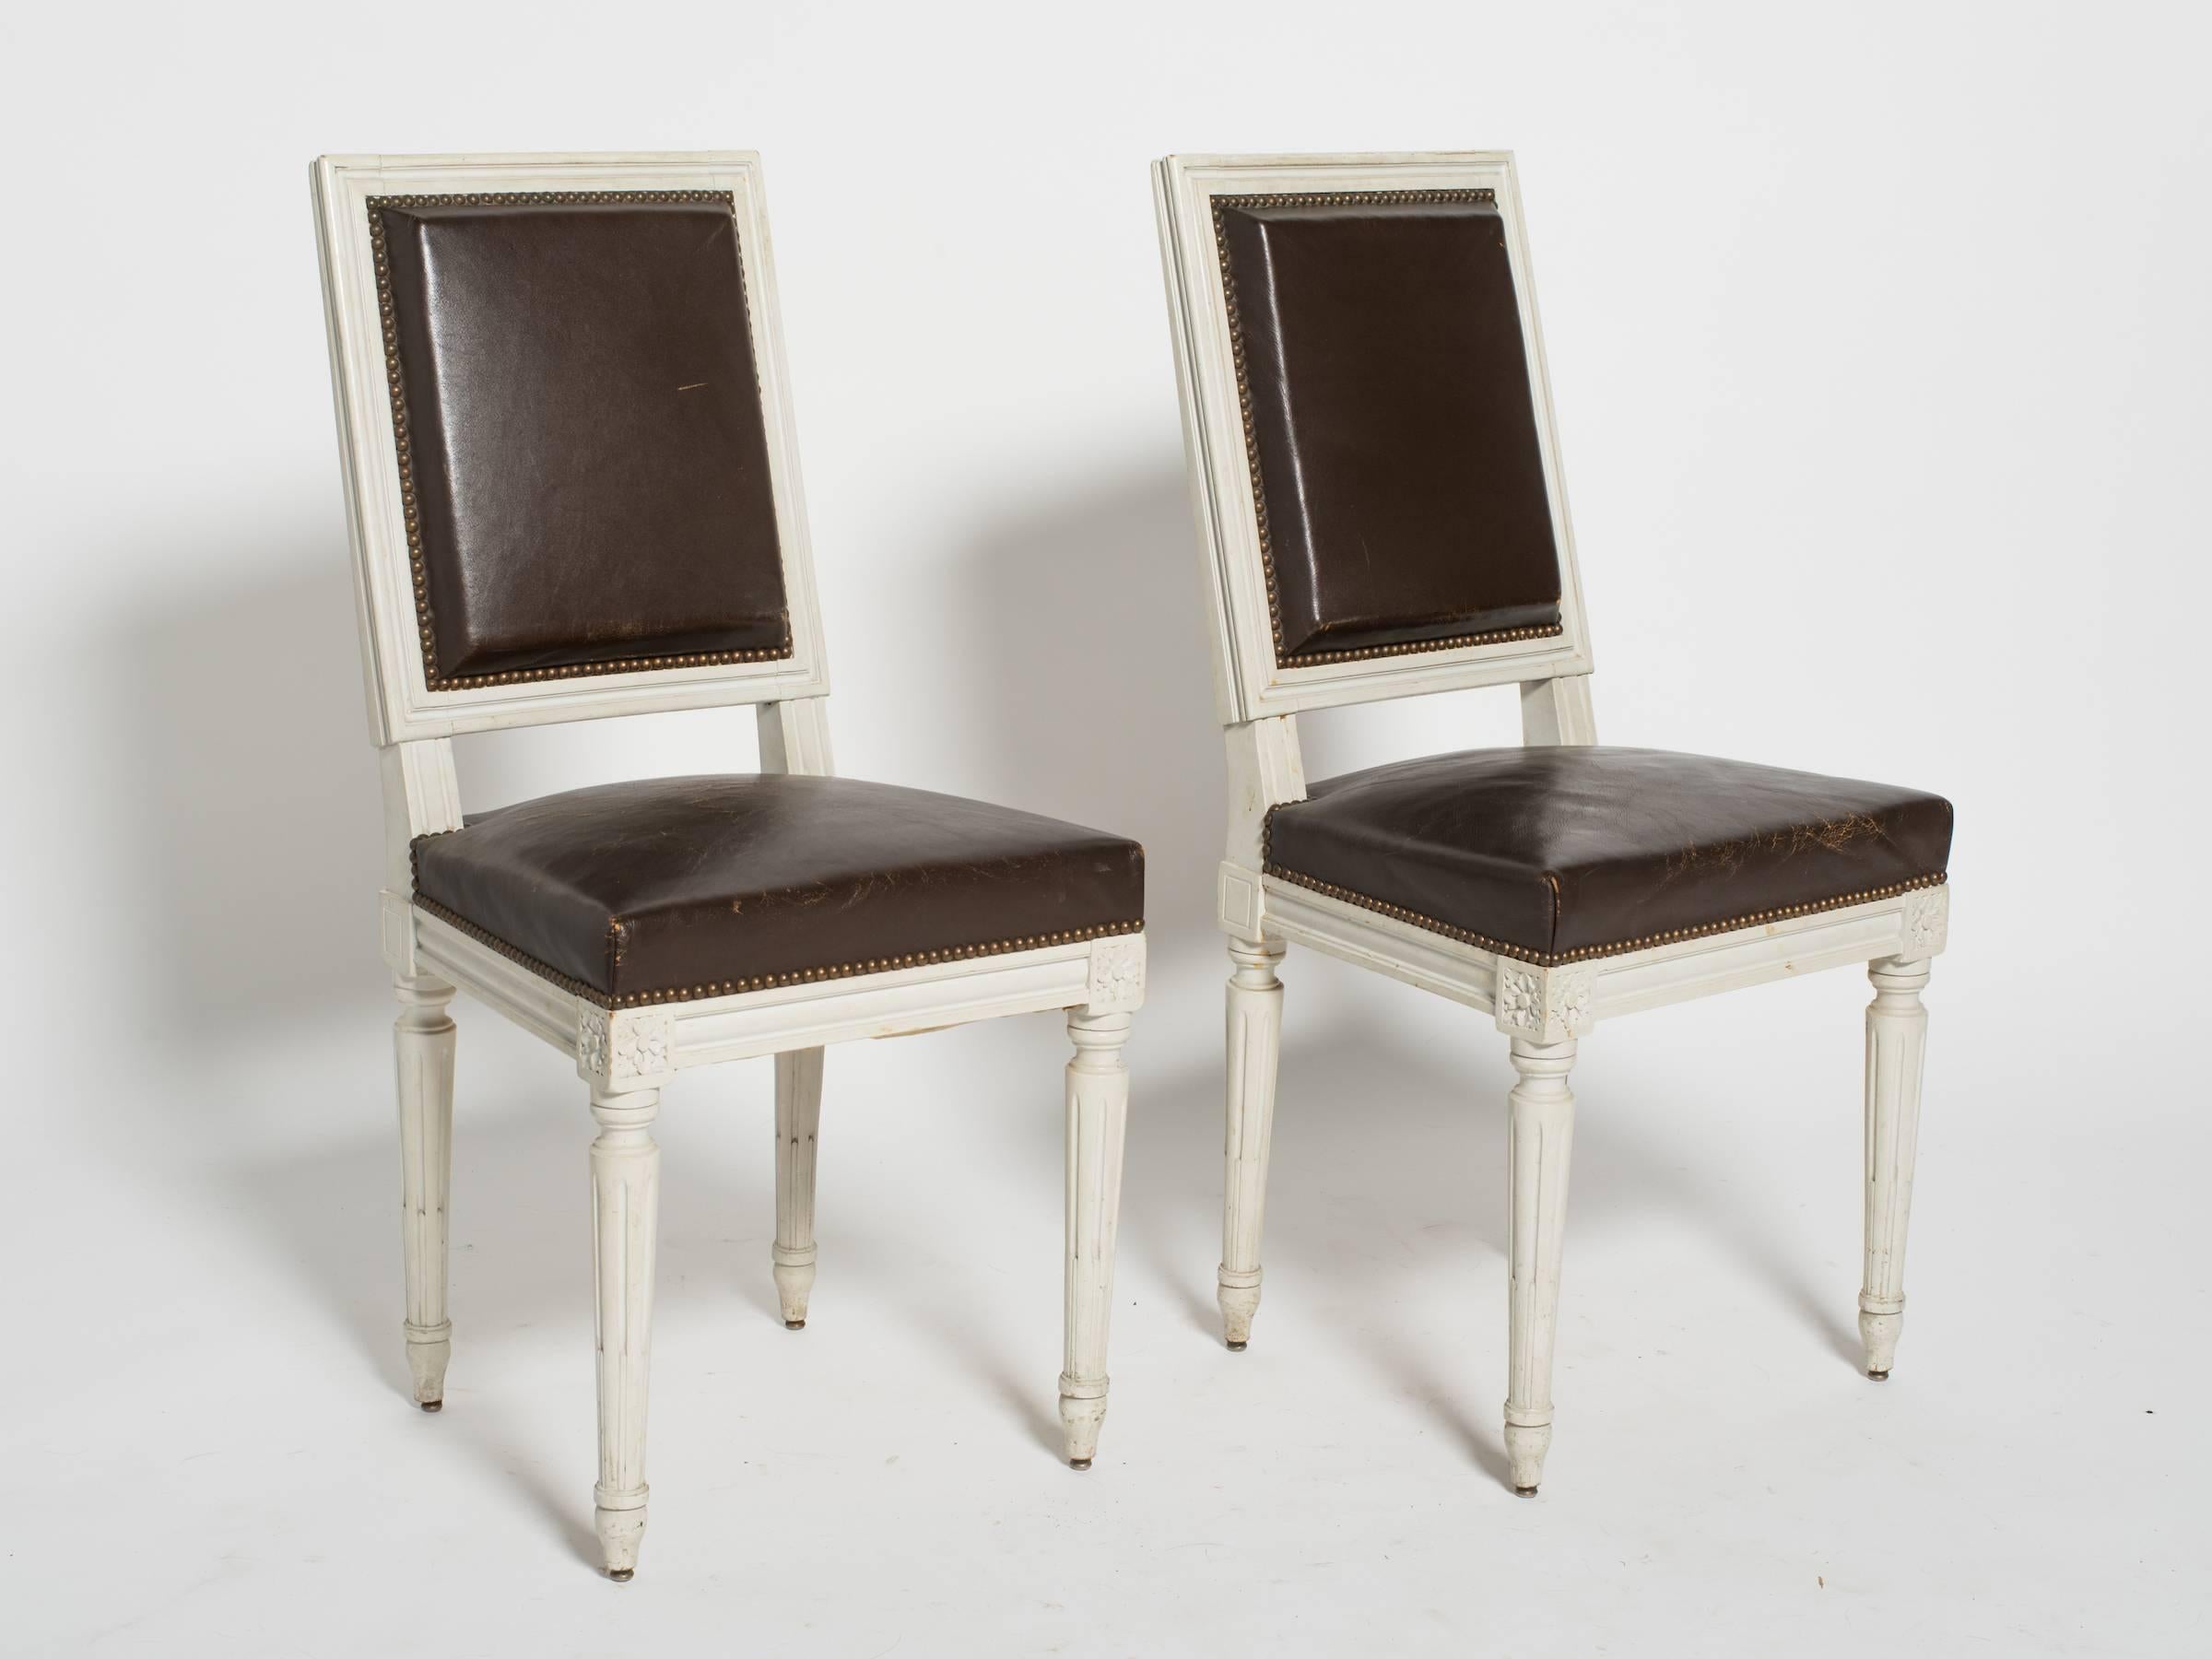 Sold in pairs. Six leather and wood 1920s Louis XVI side chairs from France.